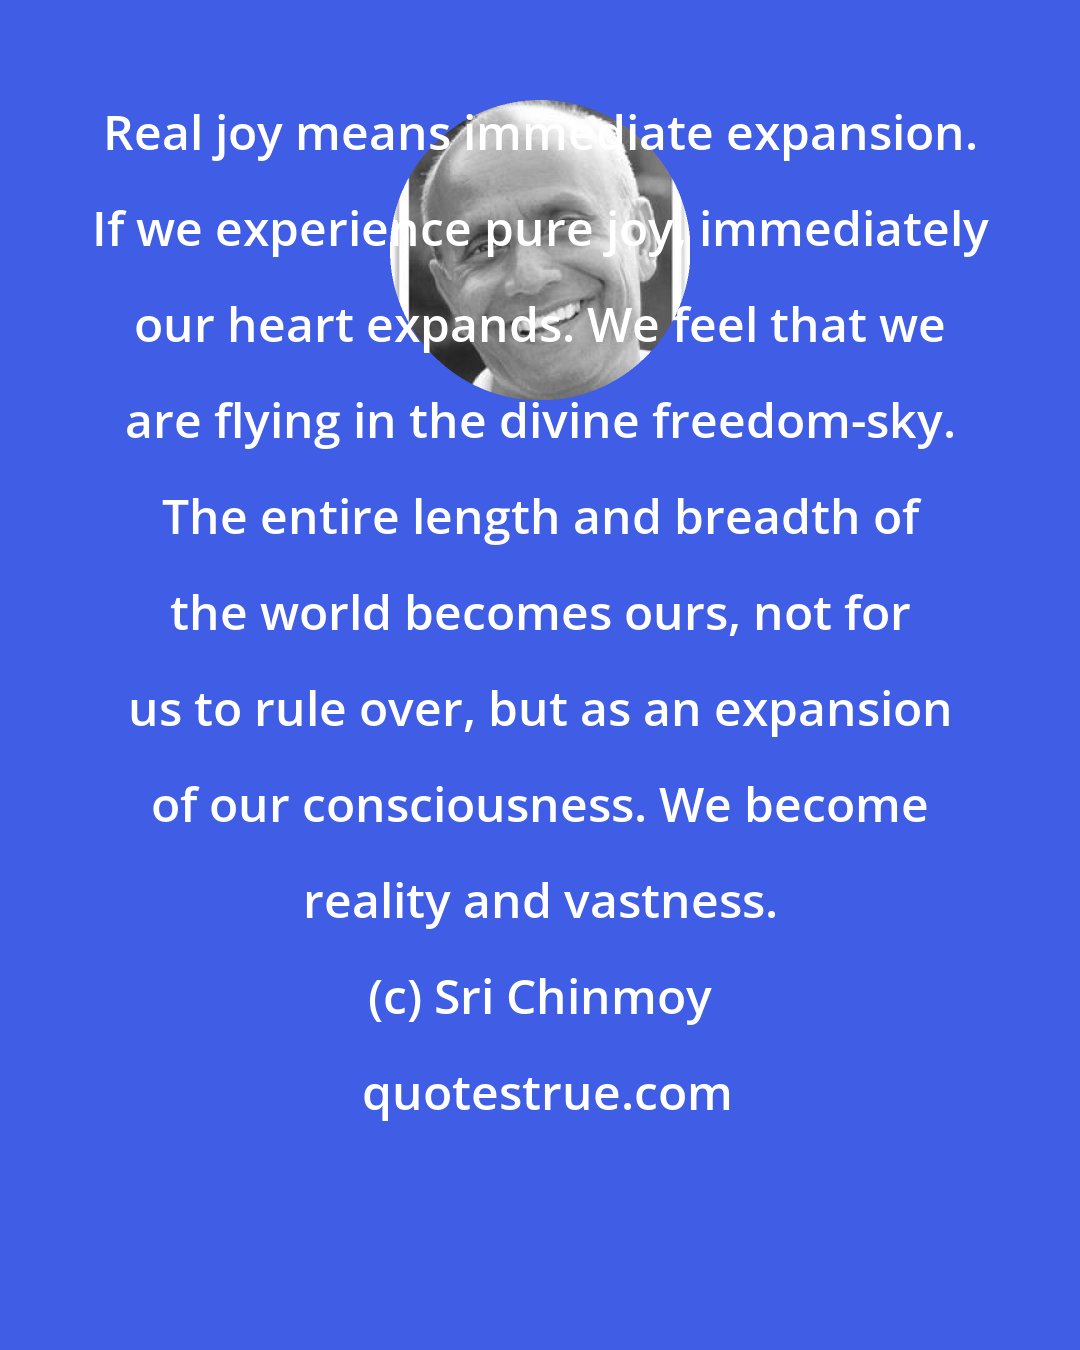 Sri Chinmoy: Real joy means immediate expansion. If we experience pure joy, immediately our heart expands. We feel that we are flying in the divine freedom-sky. The entire length and breadth of the world becomes ours, not for us to rule over, but as an expansion of our consciousness. We become reality and vastness.